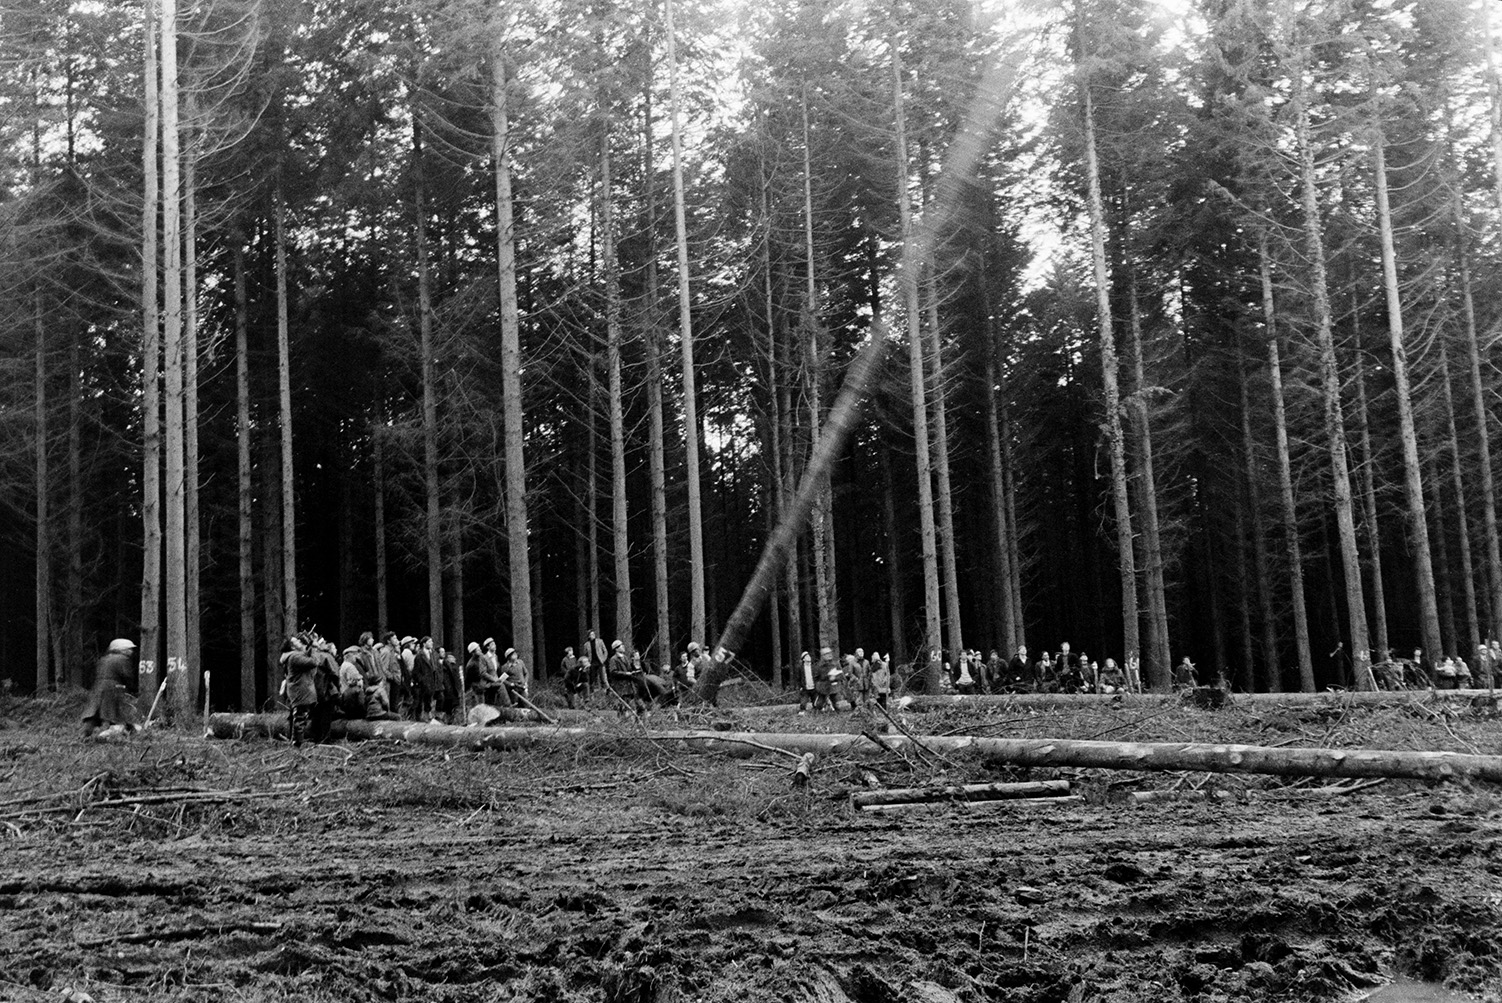 Spectators watching a tree felling contest in Eggesford Forest. The competition was a prelude to the Devon County Show.